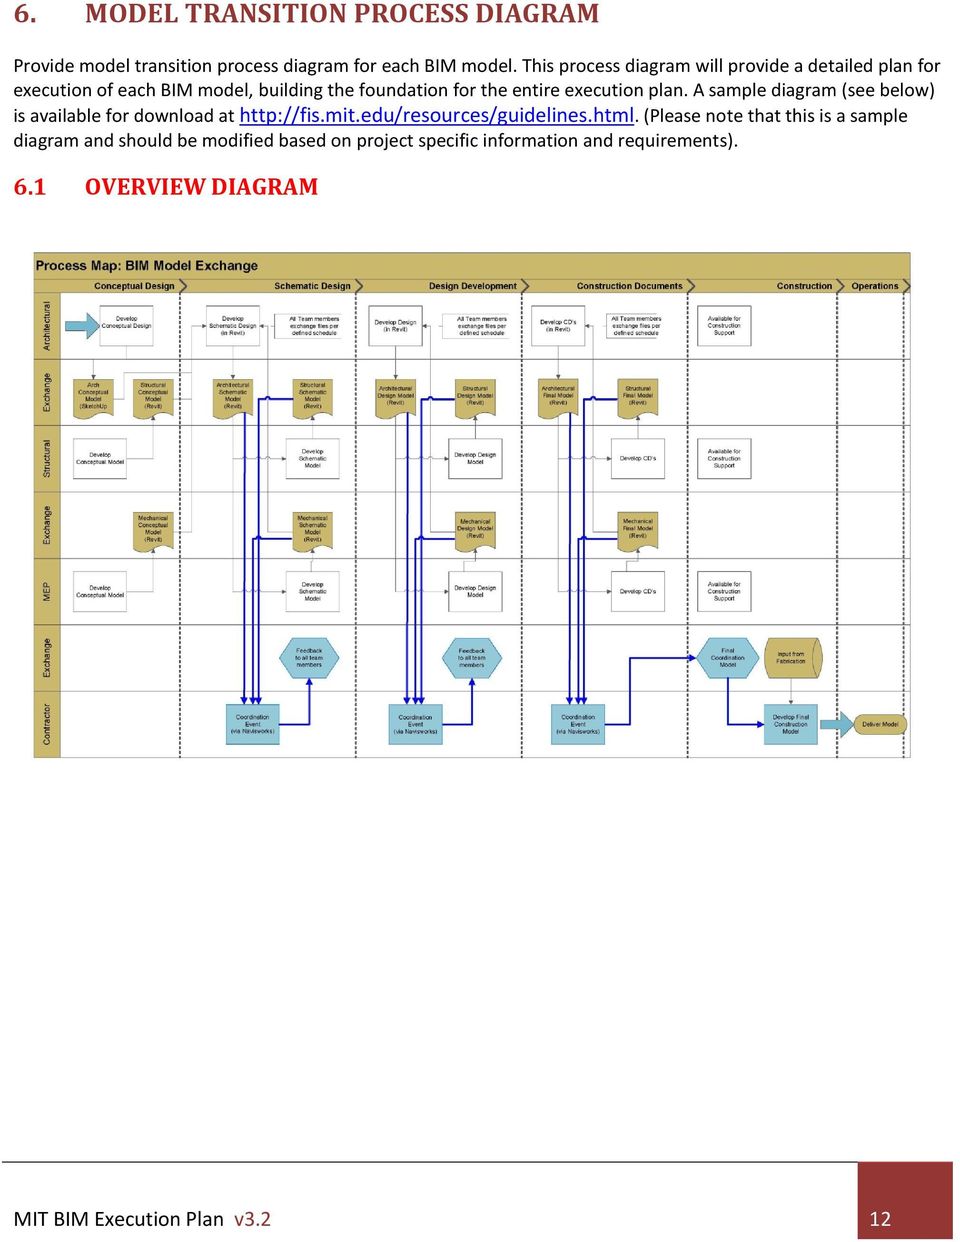 execution plan. A sample diagram (see below) is available for download at http://fis.mit.edu/resources/guidelines.html.